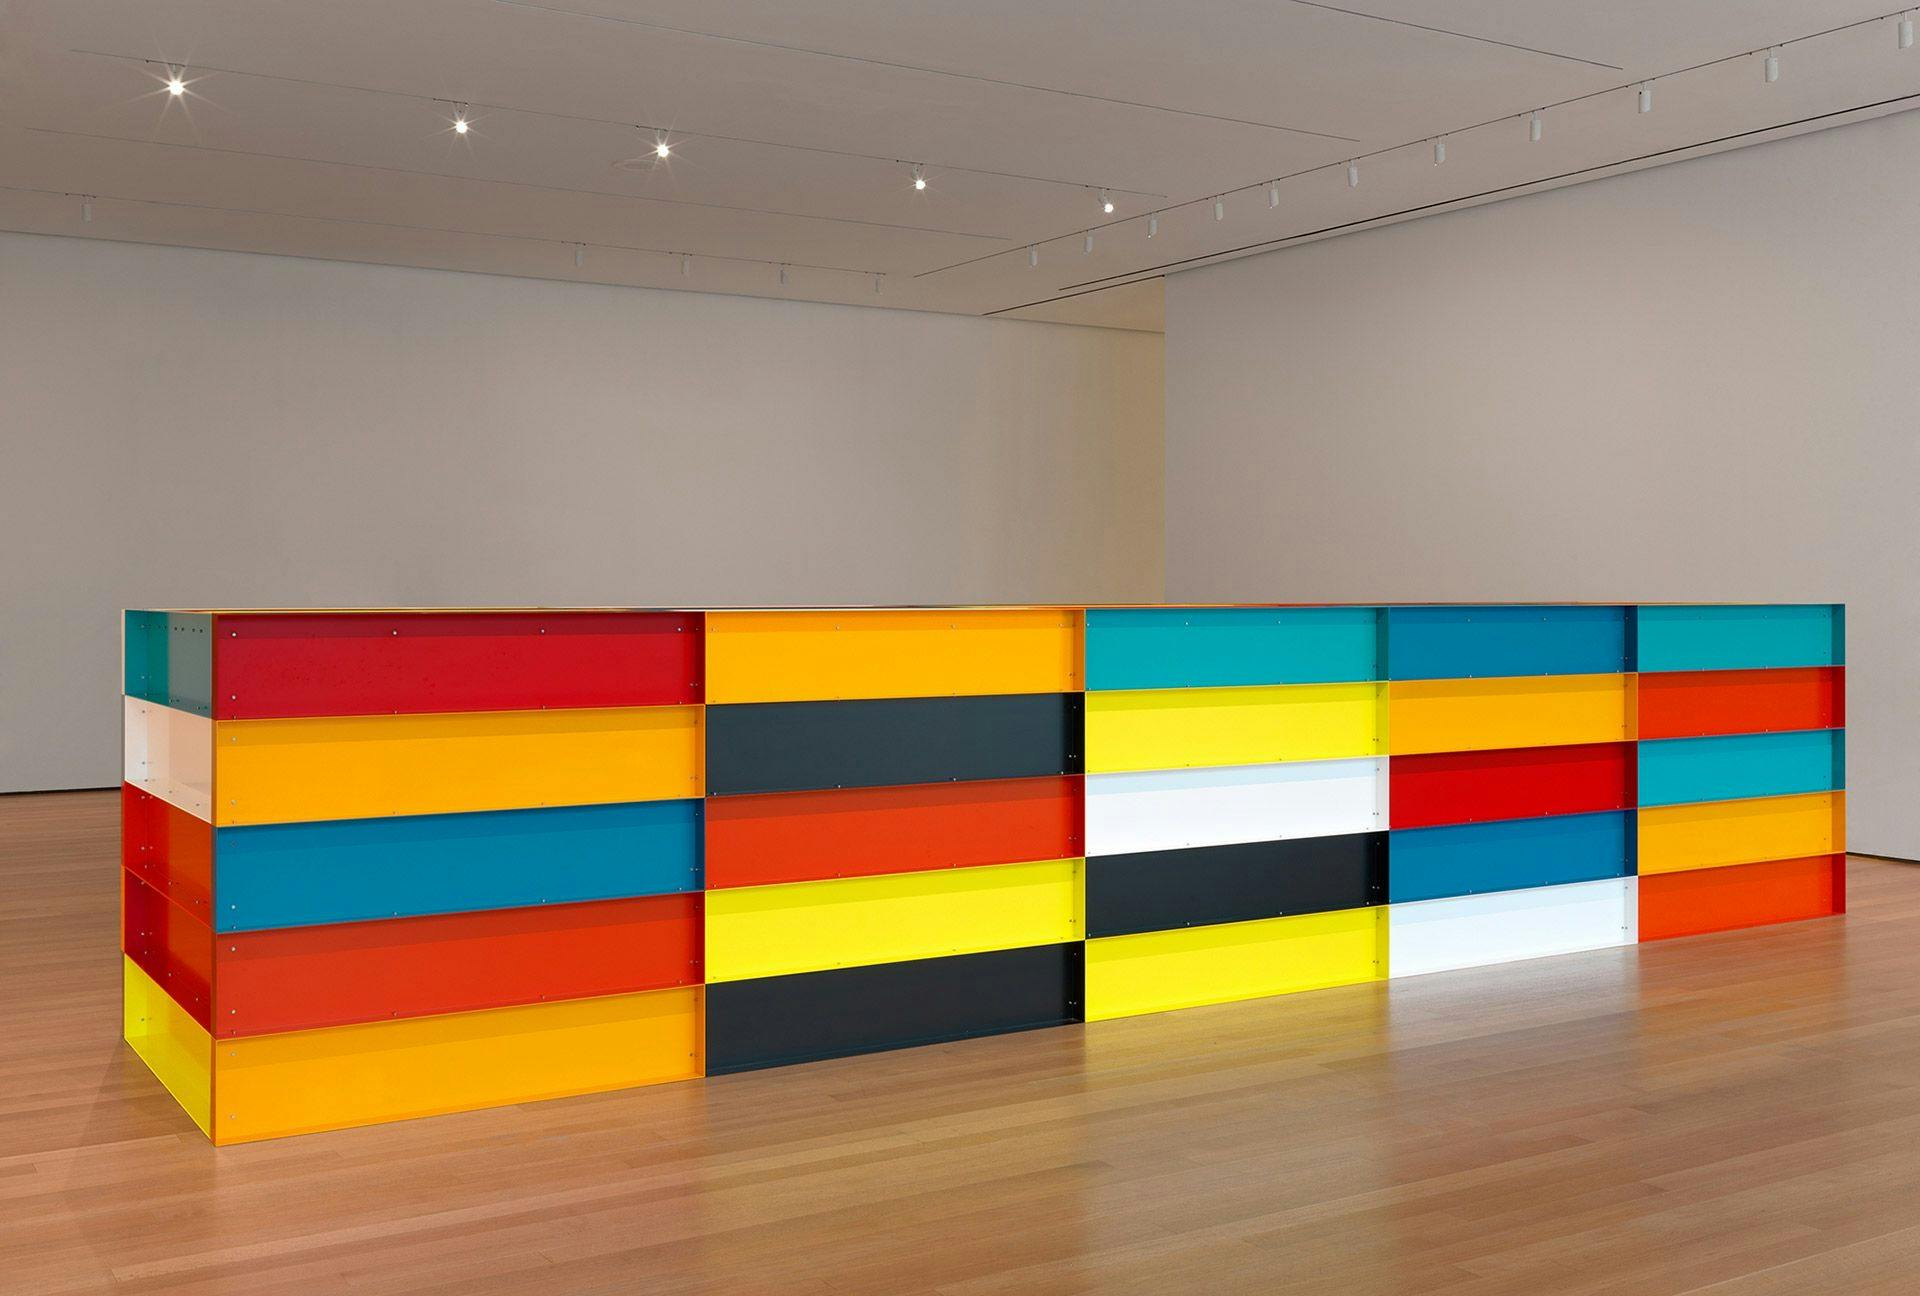 An untitled sculpture by Donald Judd, dated 1991.